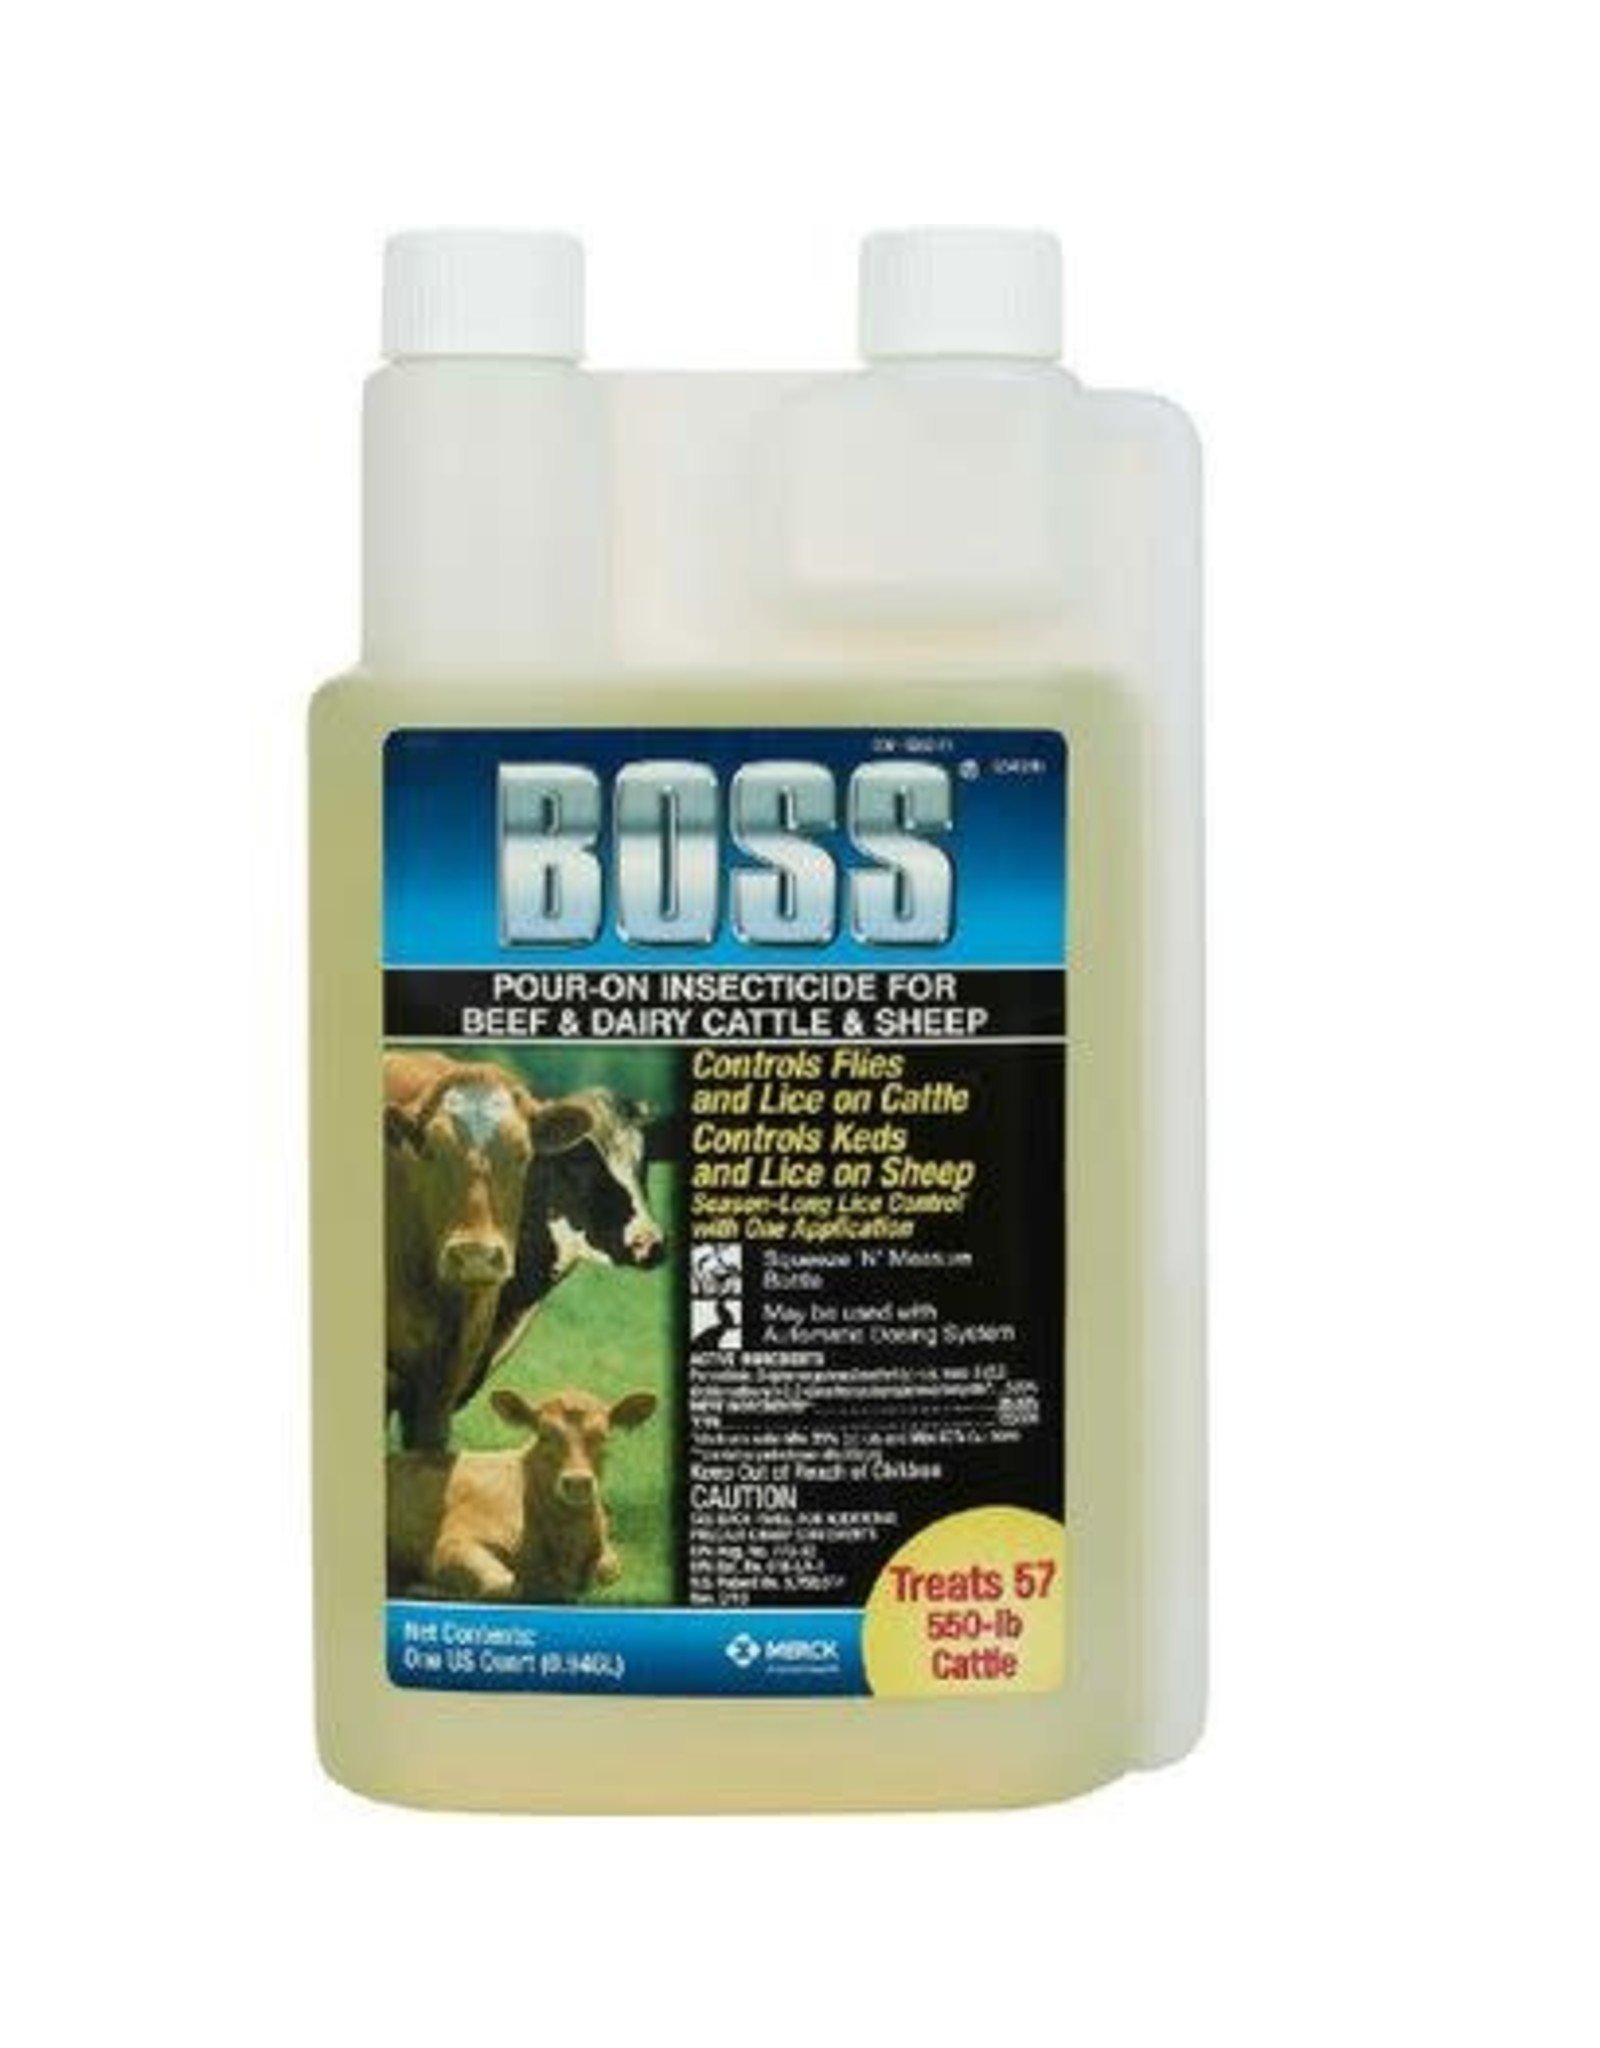 BOSS POUR ON INSECTICIDE quart